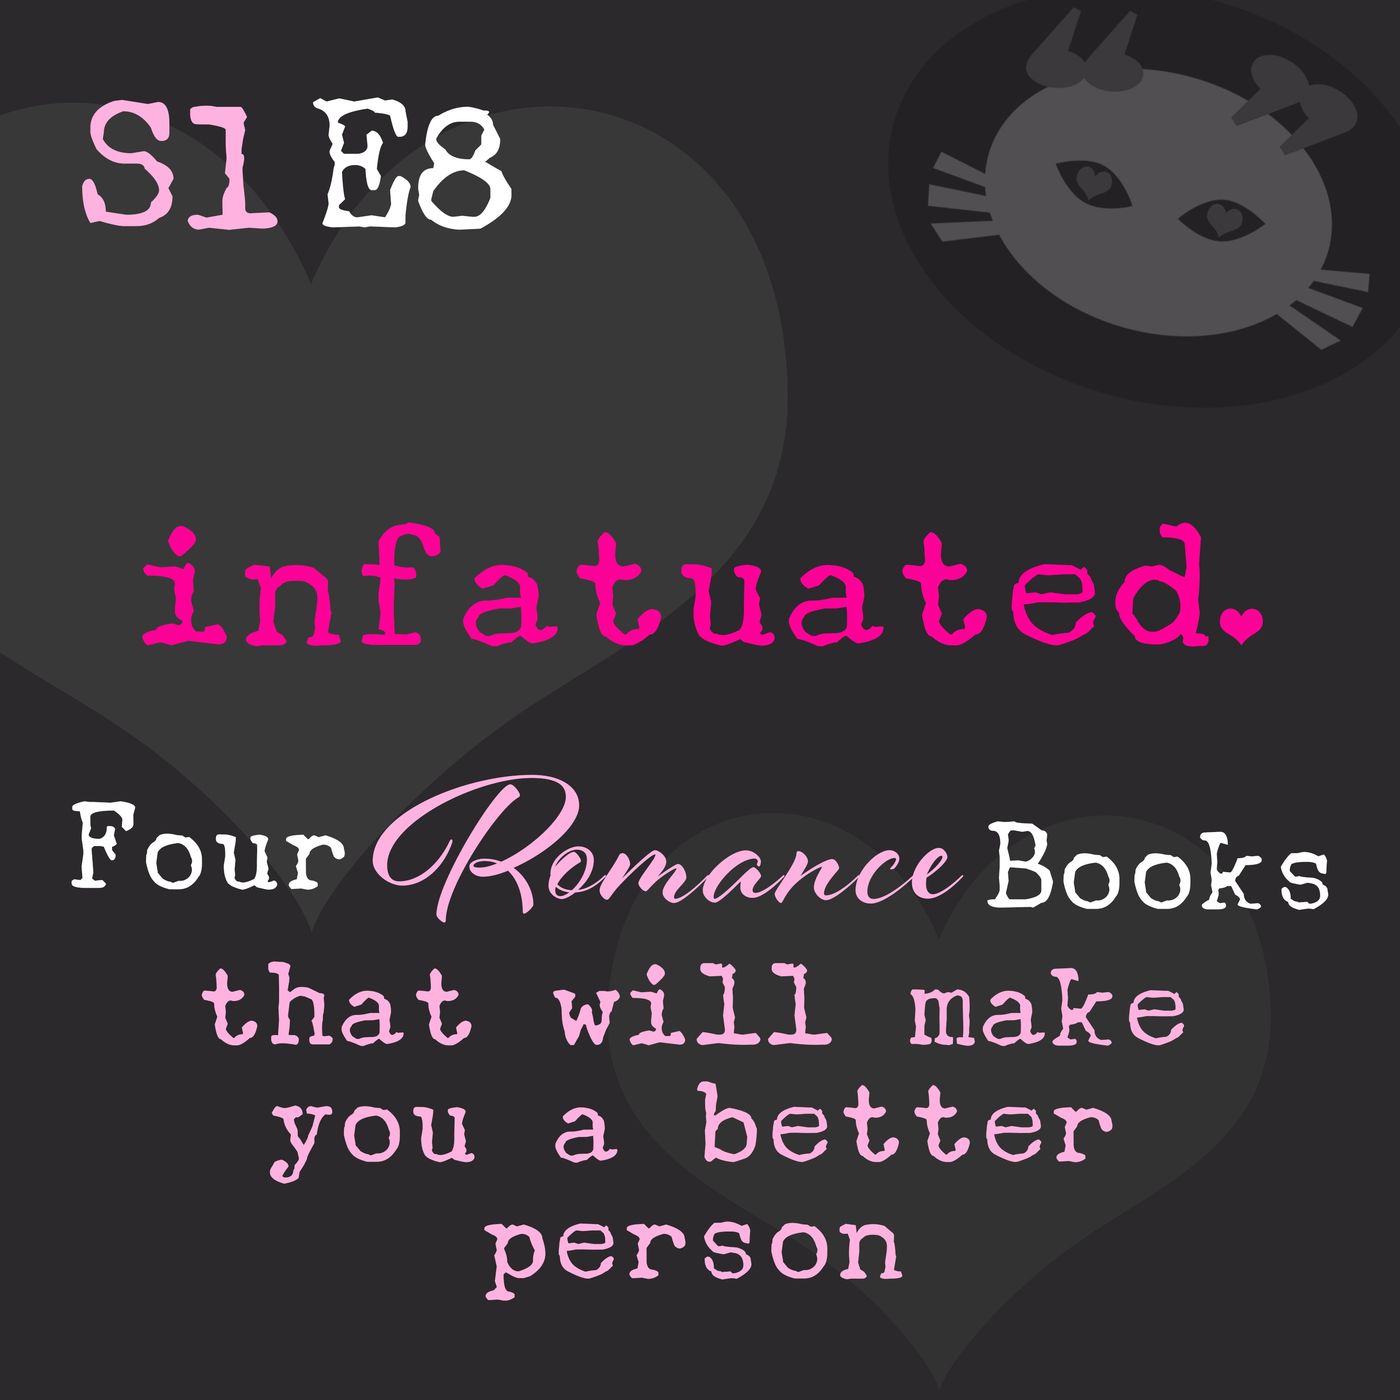 S1E8: Four romance books that will make you a better person